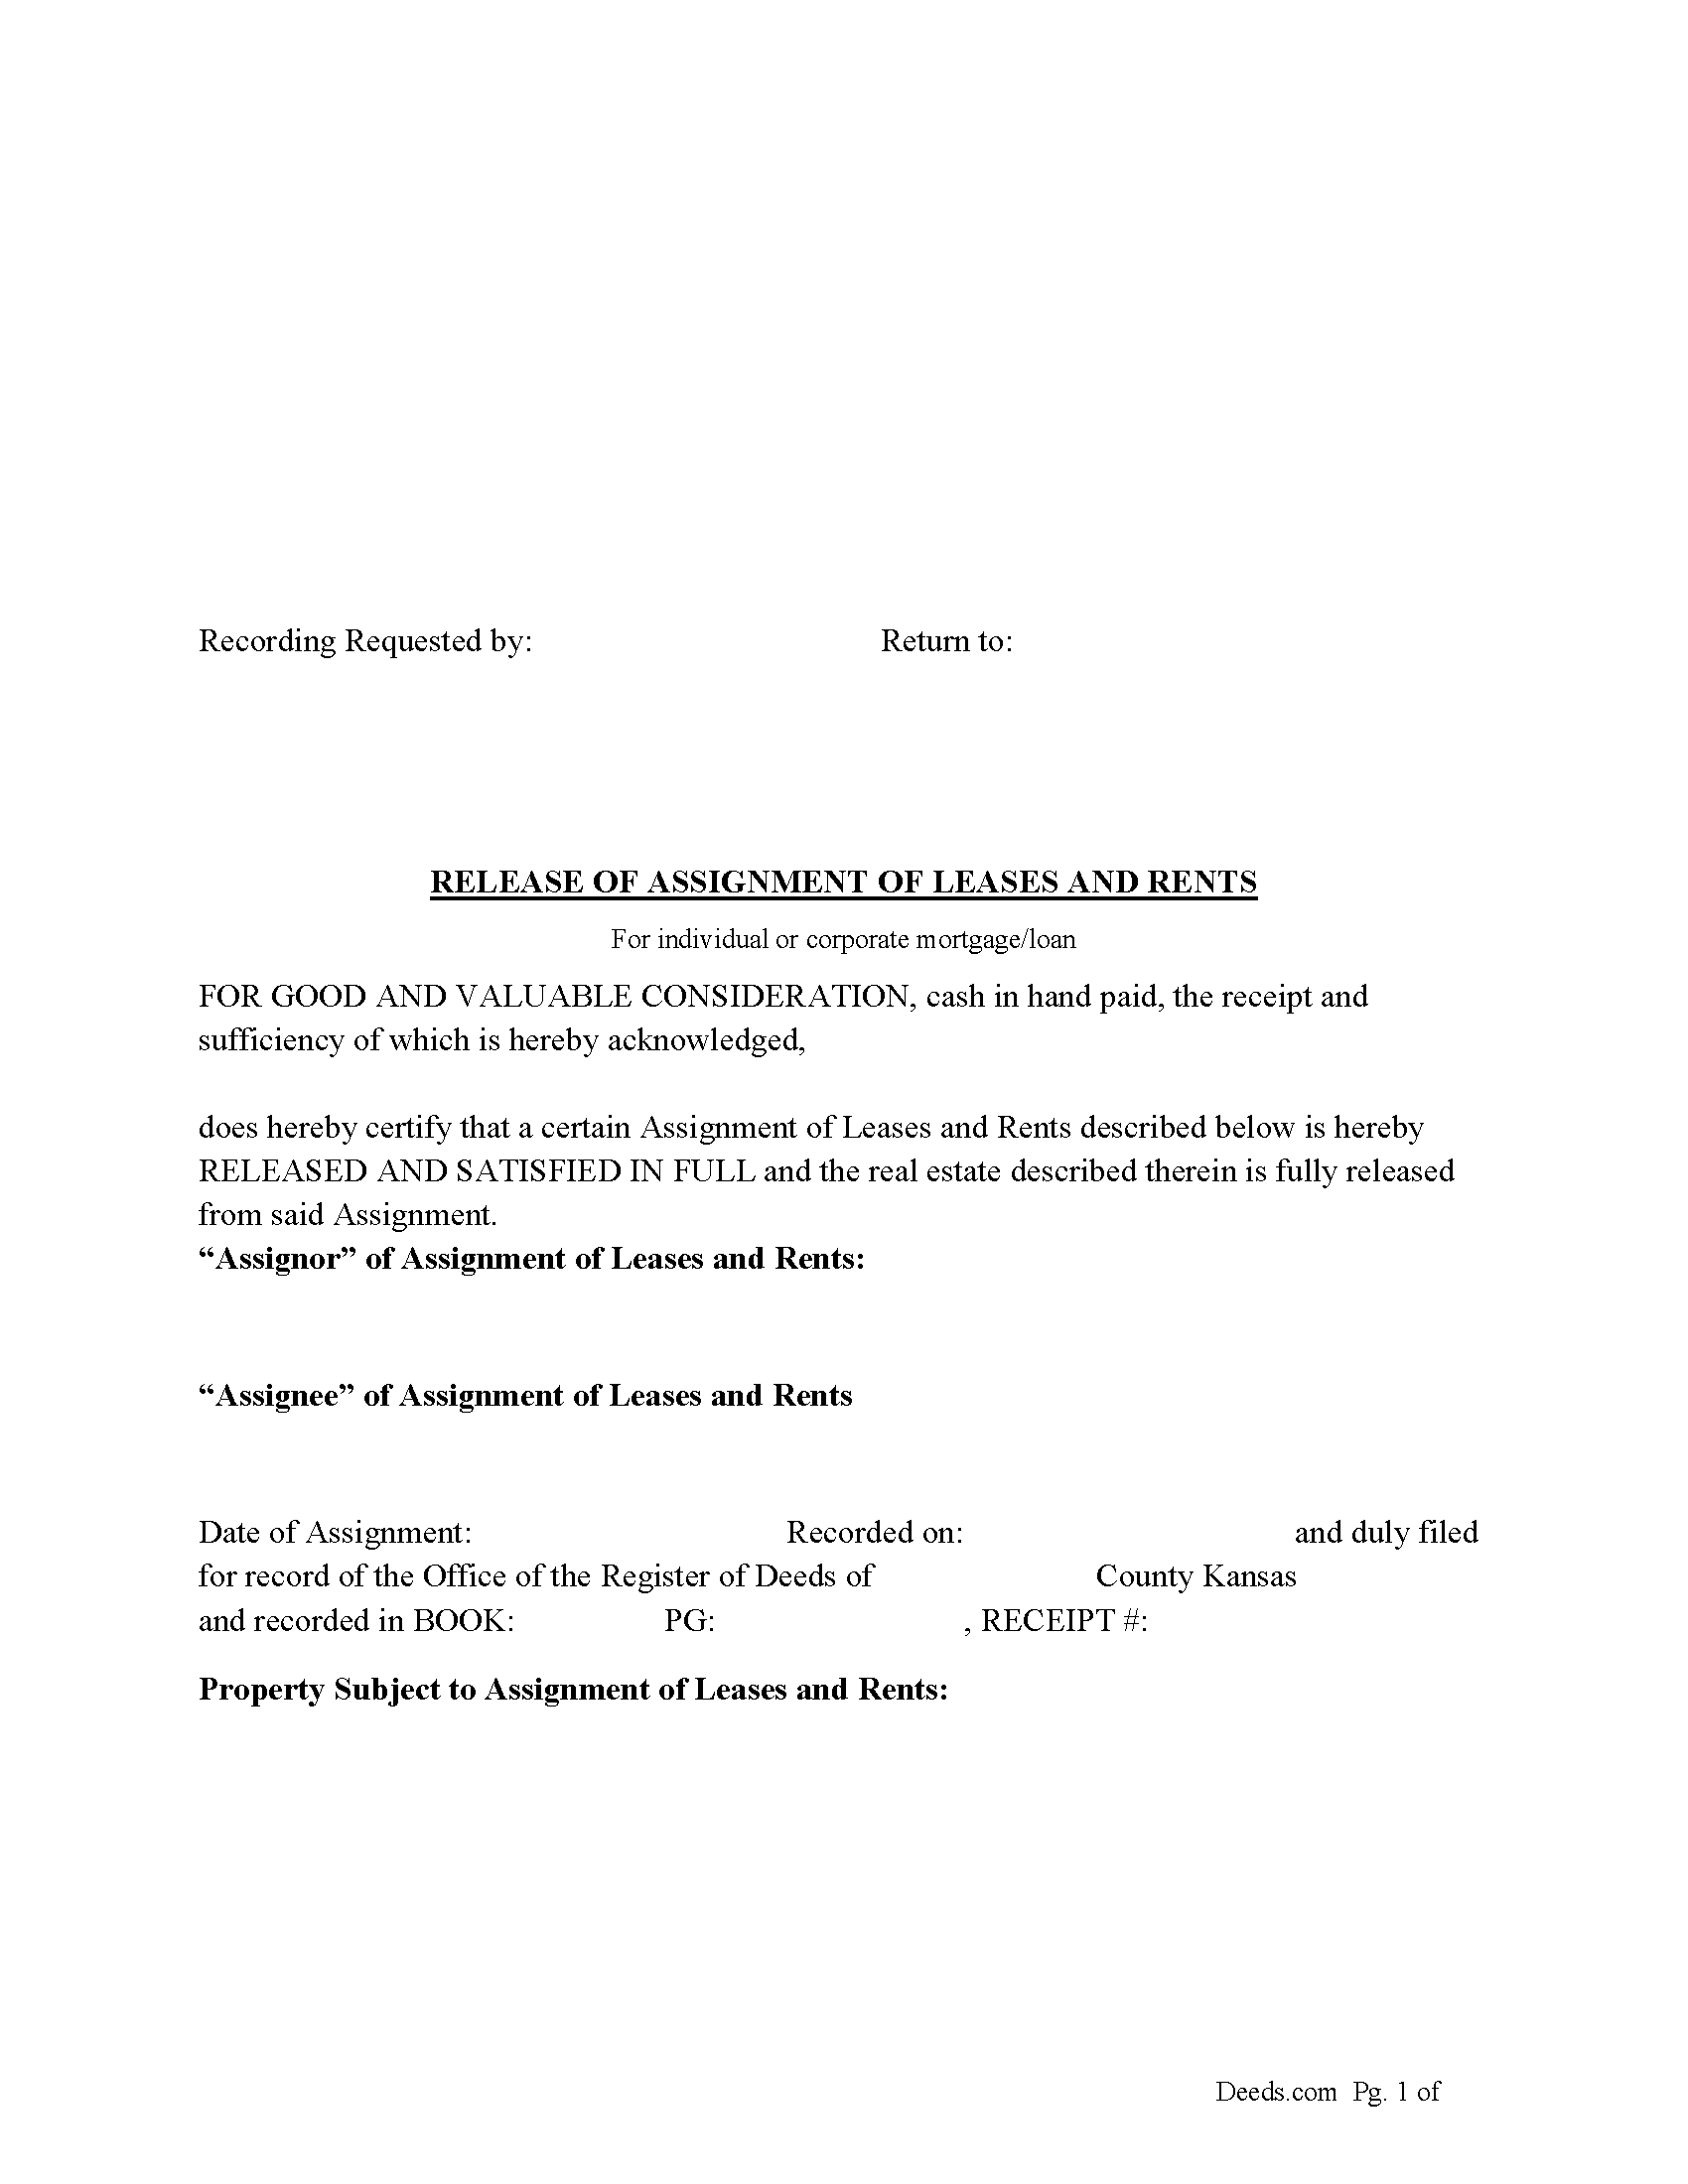 Release of Assignment of Leases and Rents Form